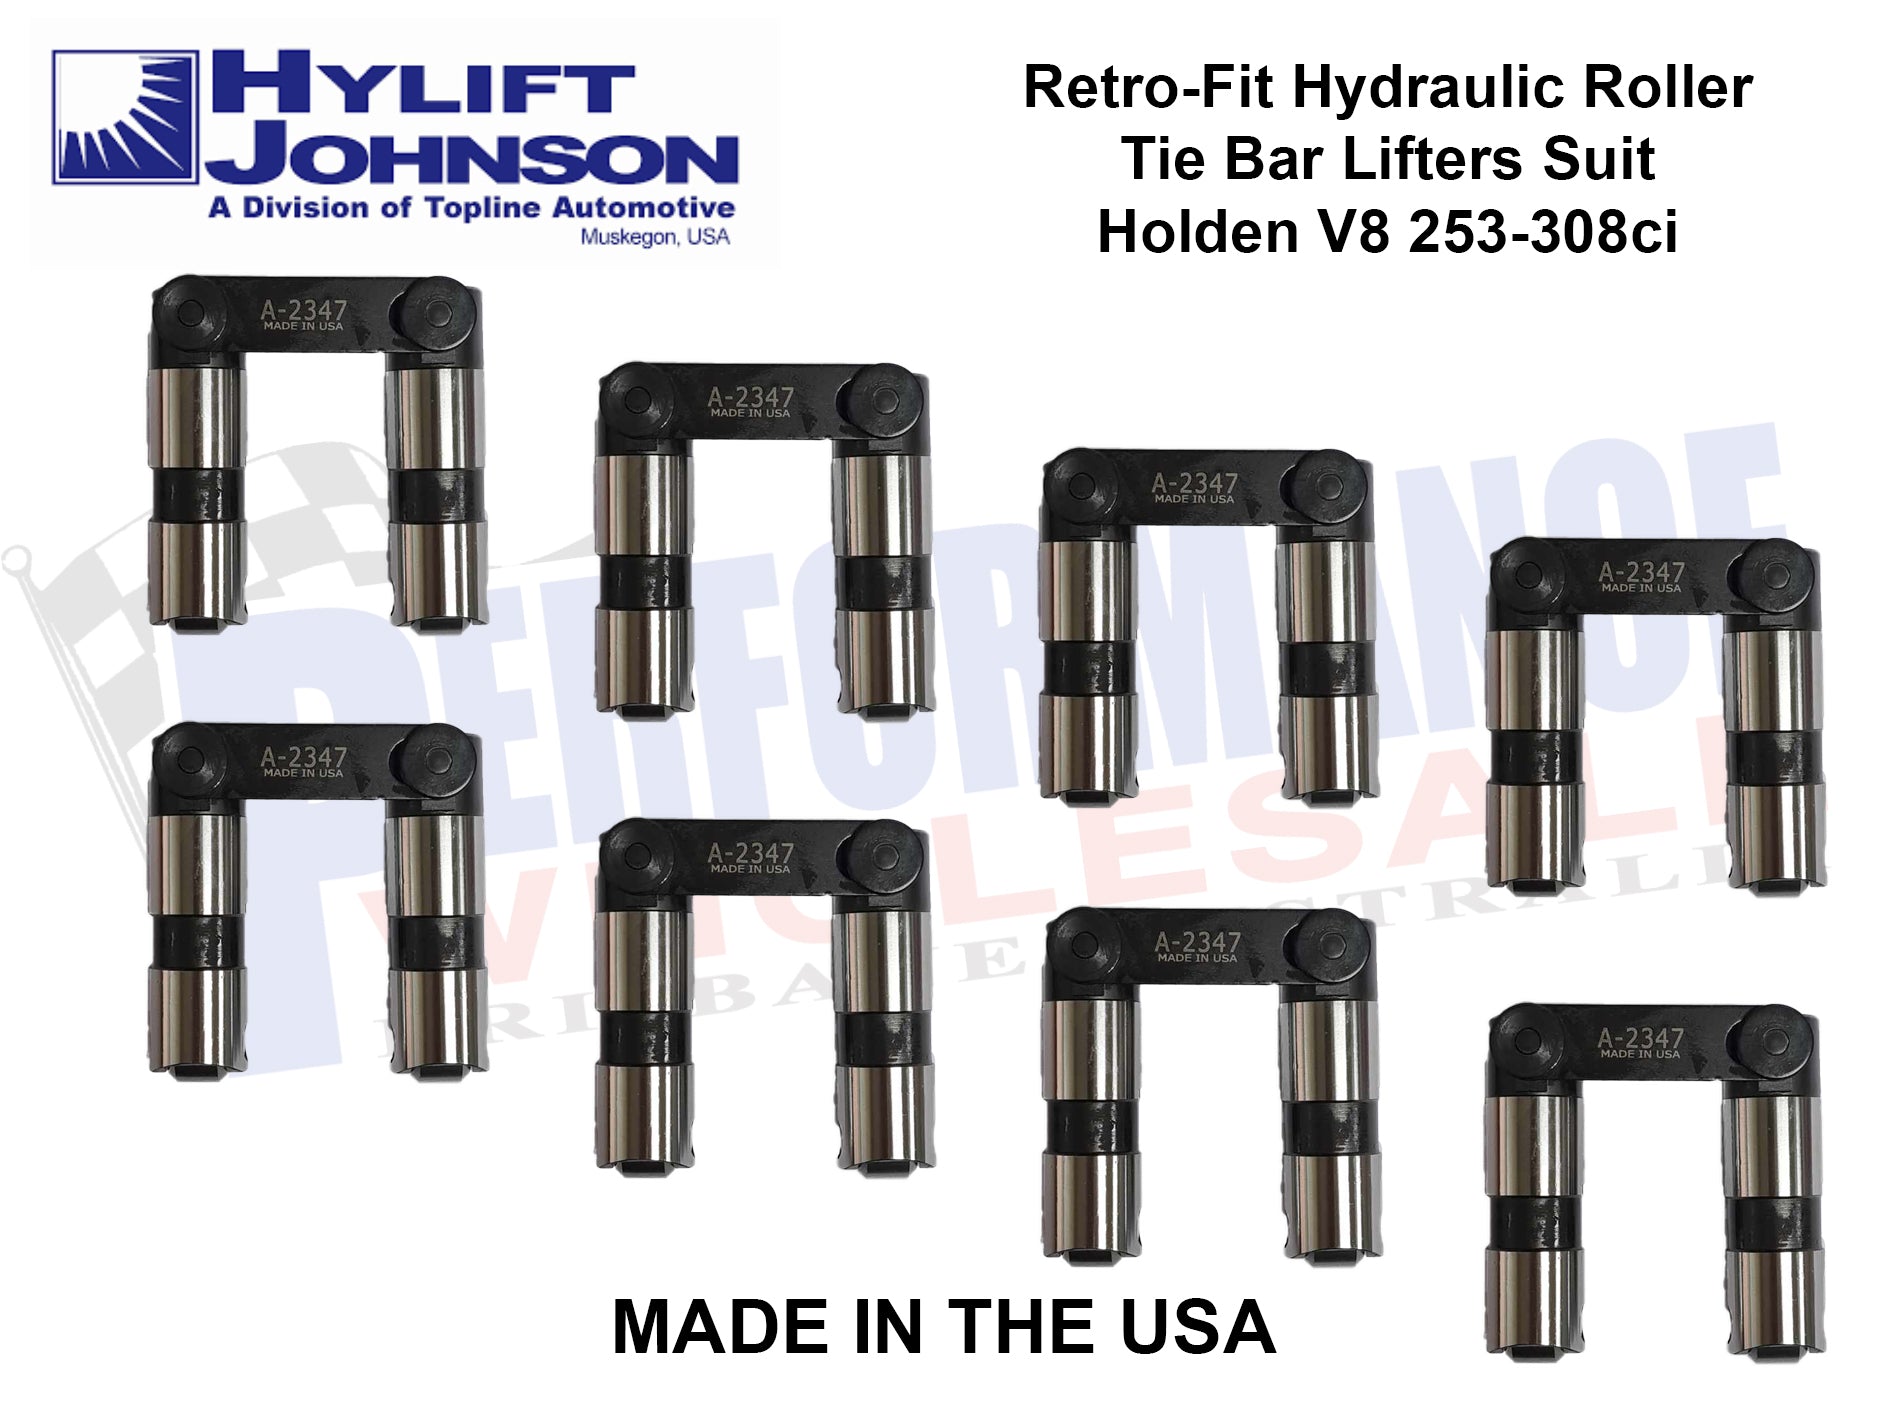 Hy-lift Johnson Retro-Fit Hydraulic Roller Tie Bar Lifters Suit Holden V8 253-308ci